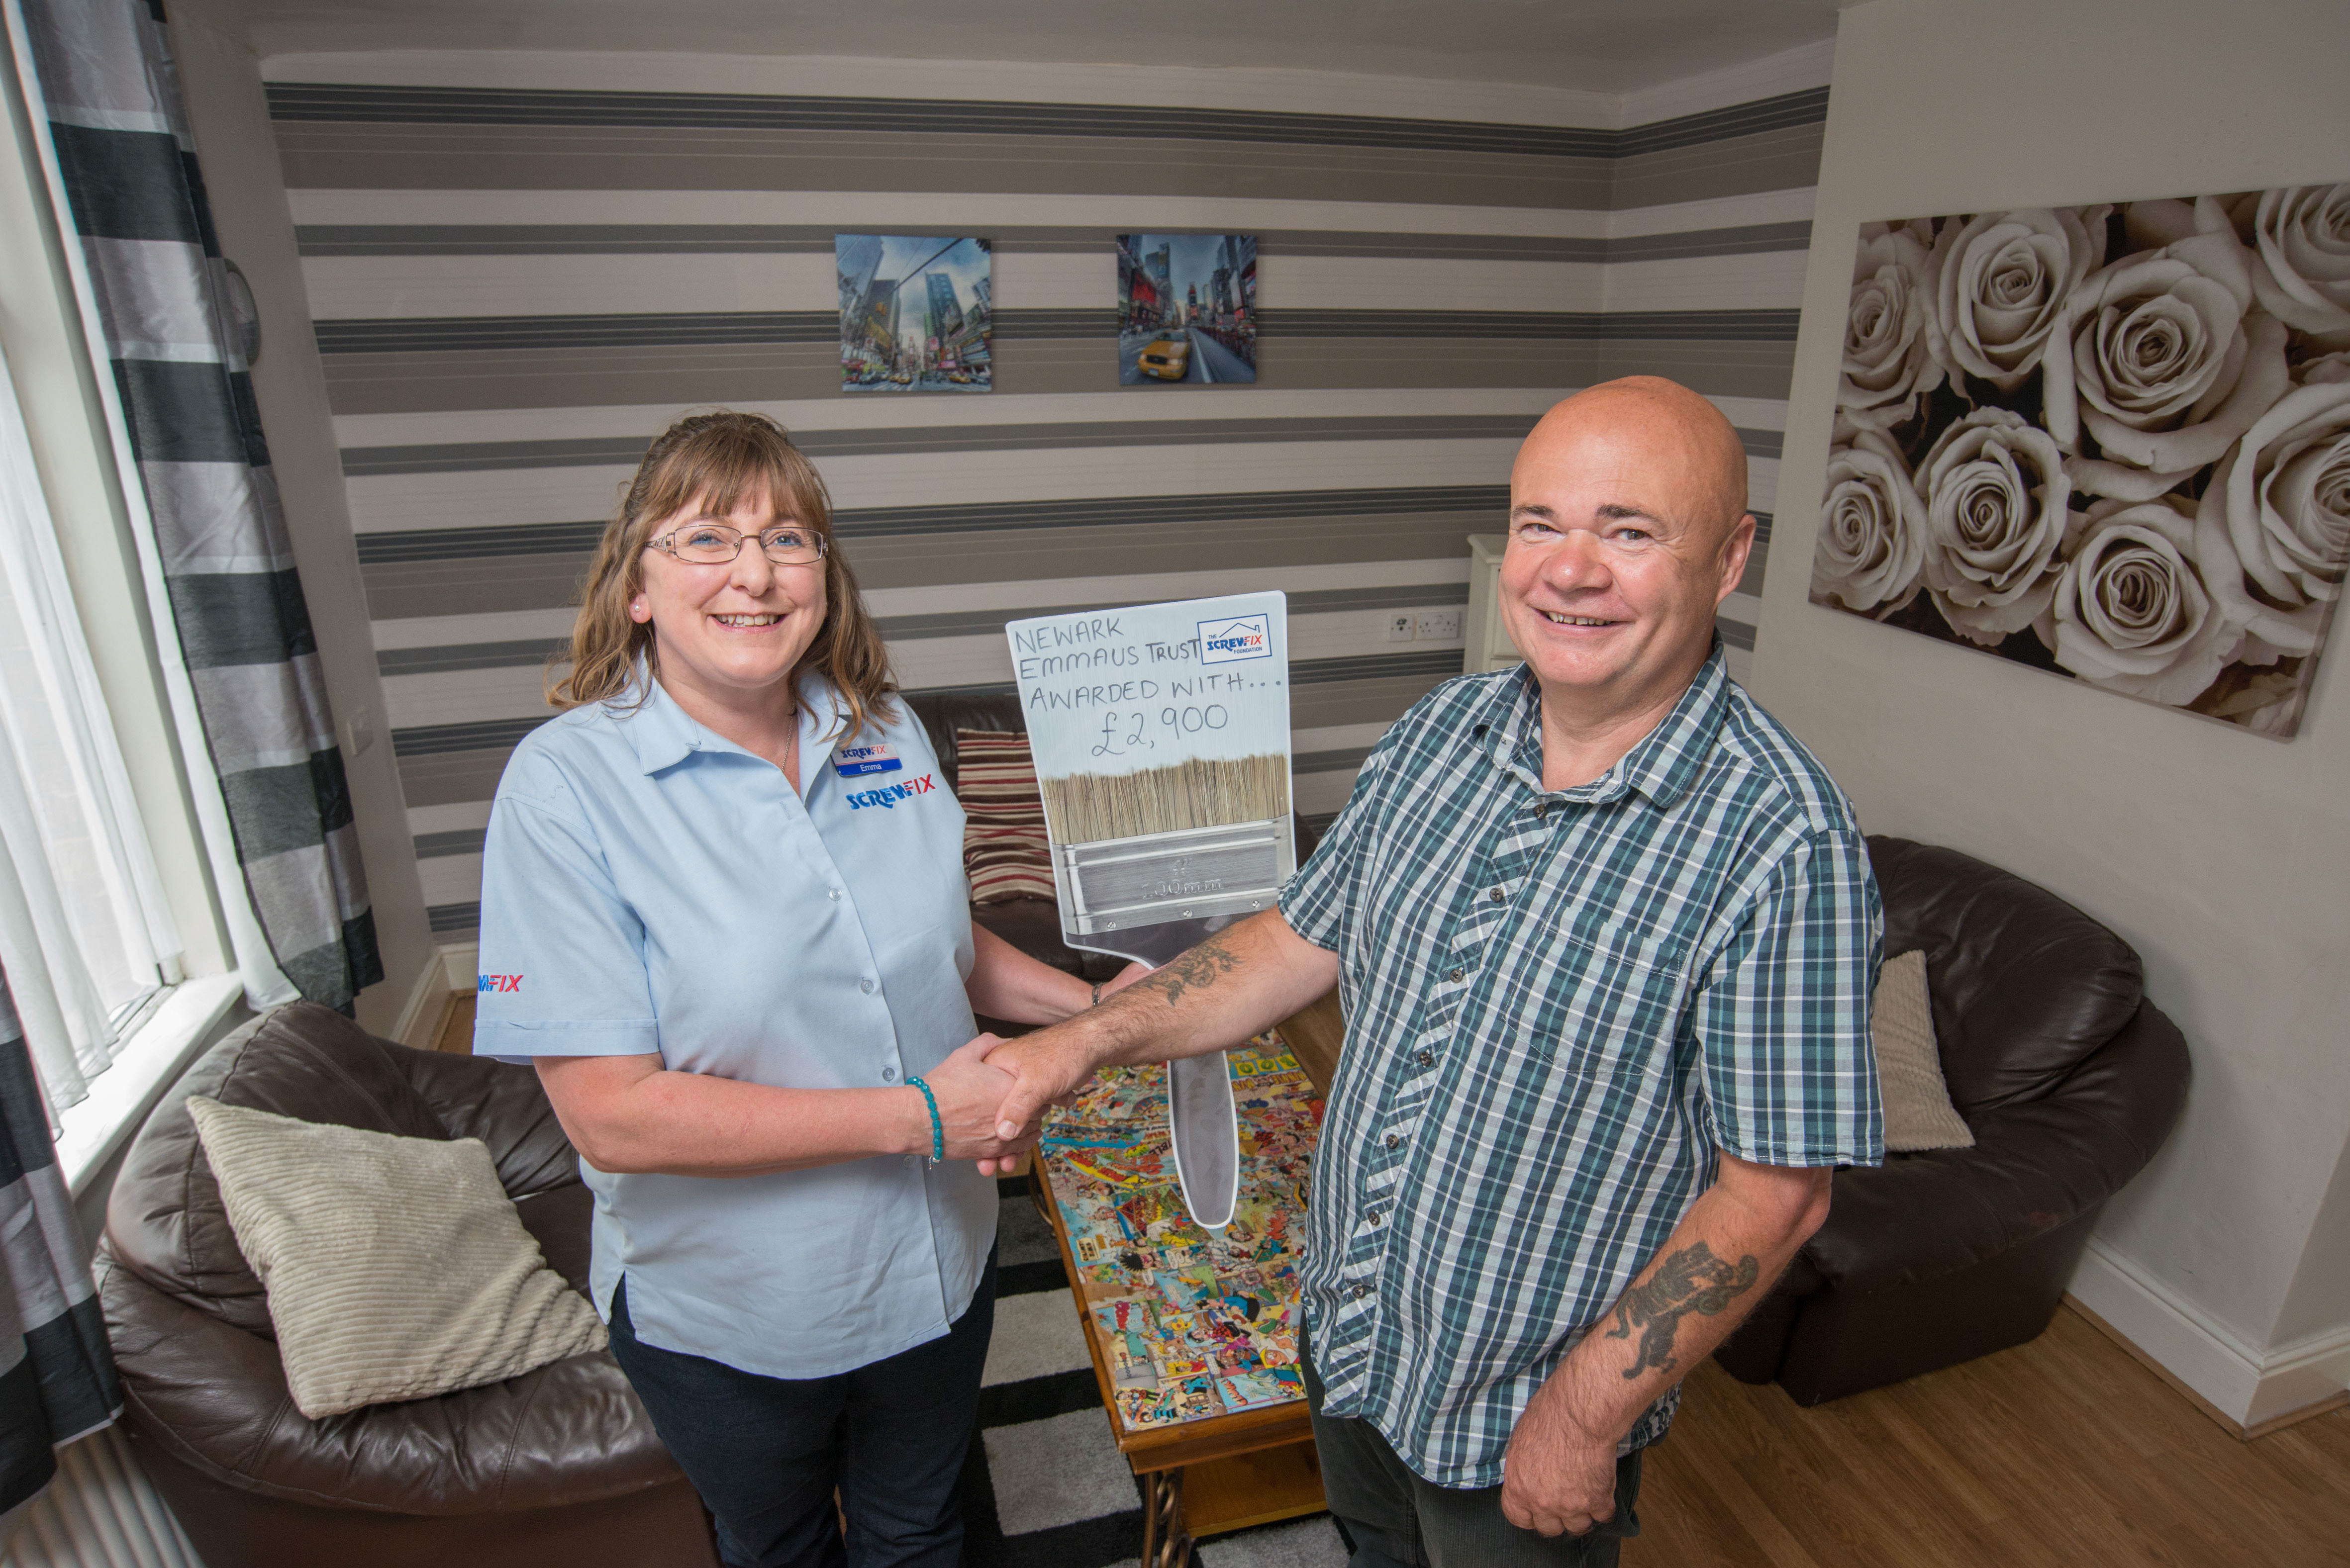 Newark based charity gets a helping hand from the Screwfix Foundation